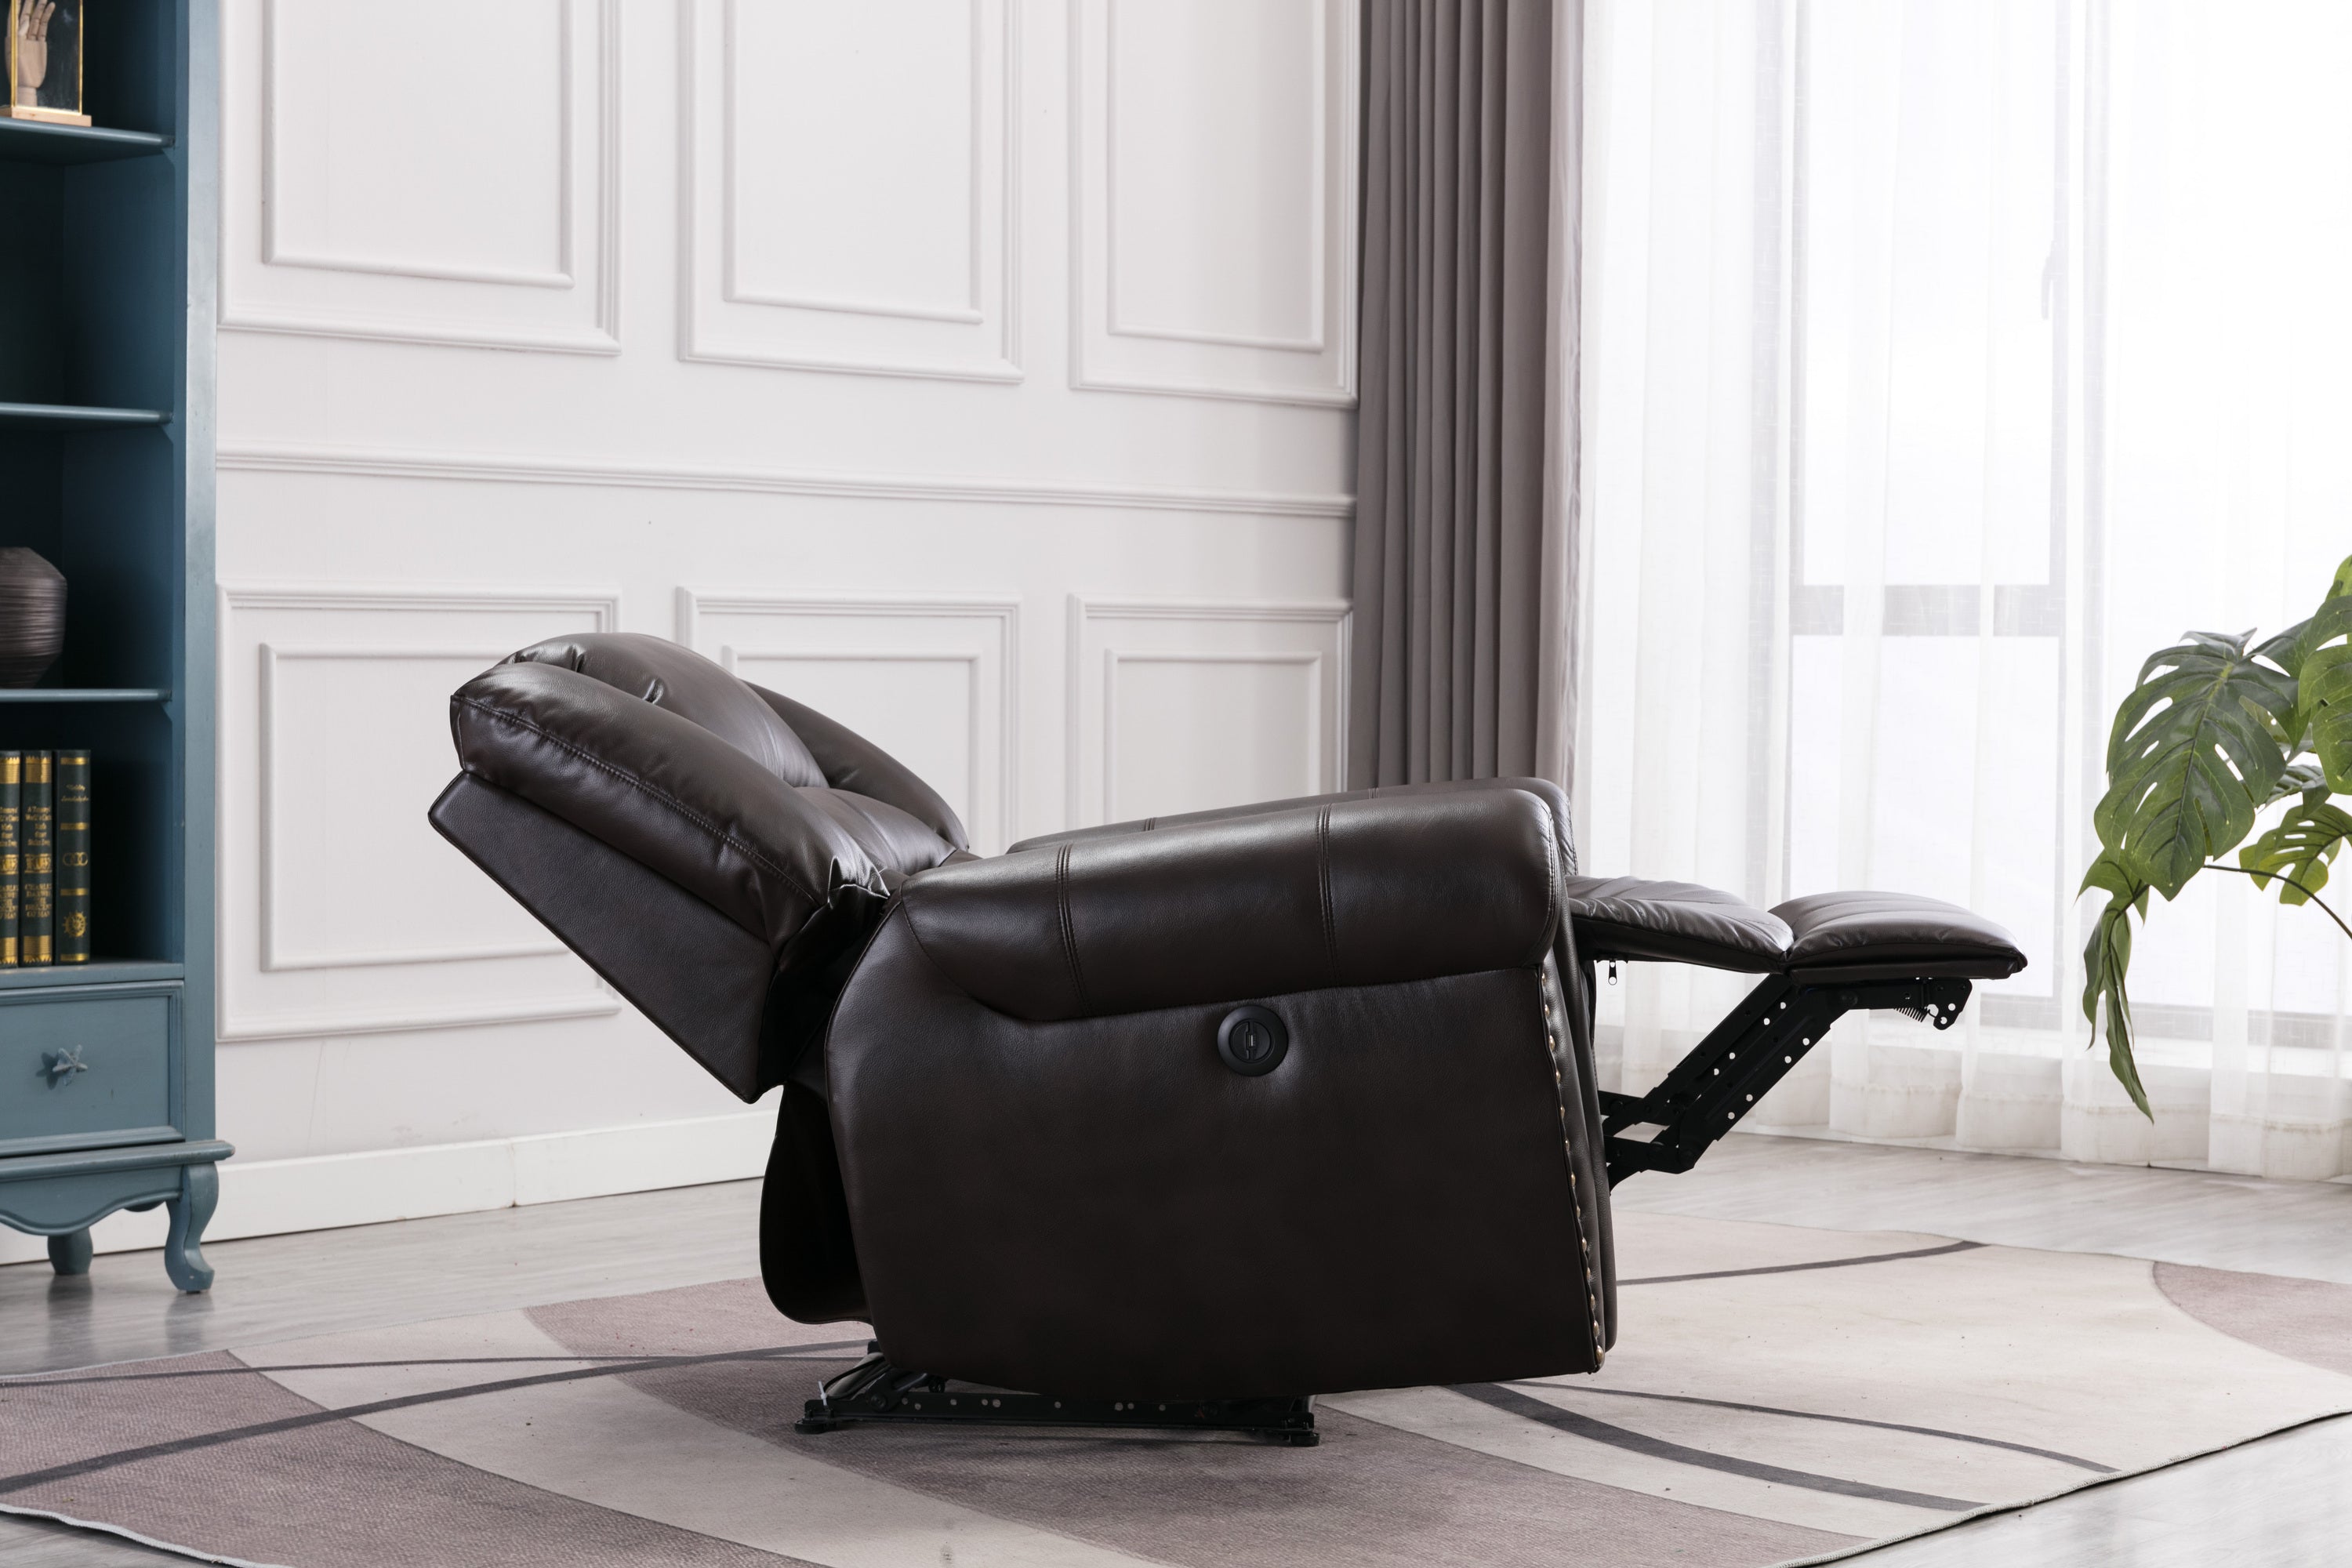 Breathable Bonded Leather Electric Single Recliner